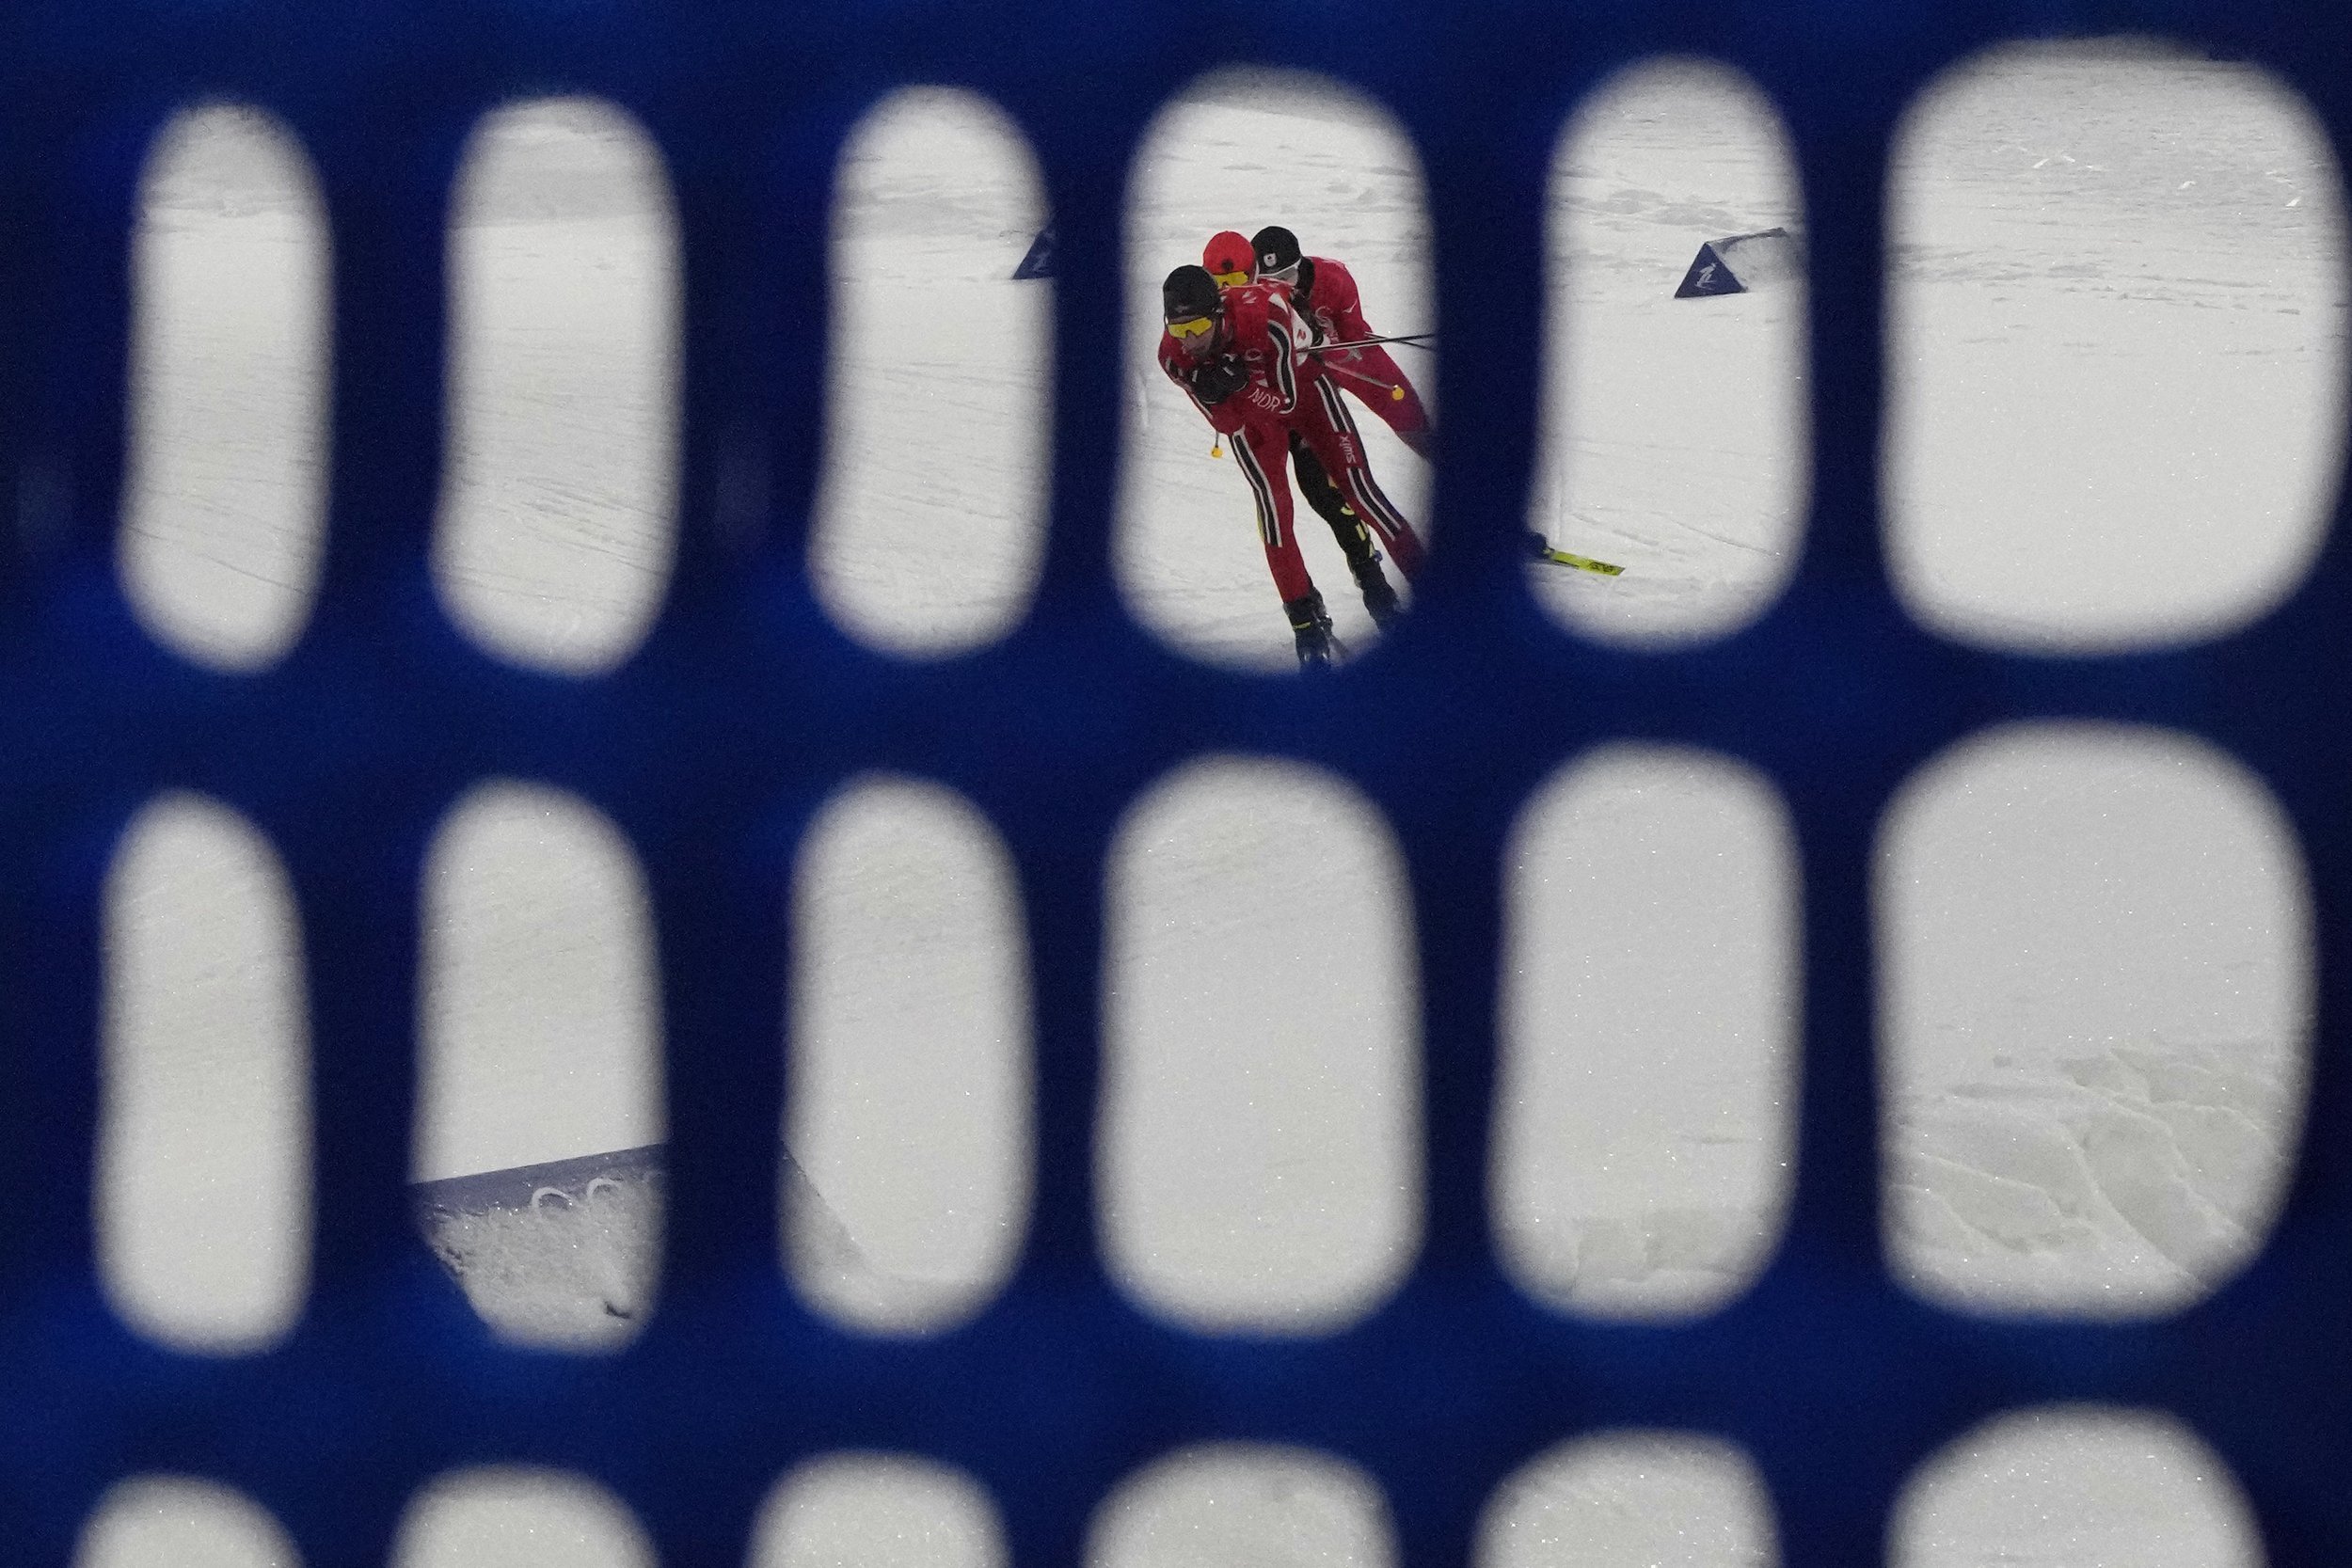  Norway's Espen Bjoernstad leads a group during the cross-country skiing competition of the team Gundersen large hill/4x5km at the 2022 Winter Olympics, Thursday, Feb. 17, 2022, in Zhangjiakou, China. (AP Photo/Aaron Favila) 